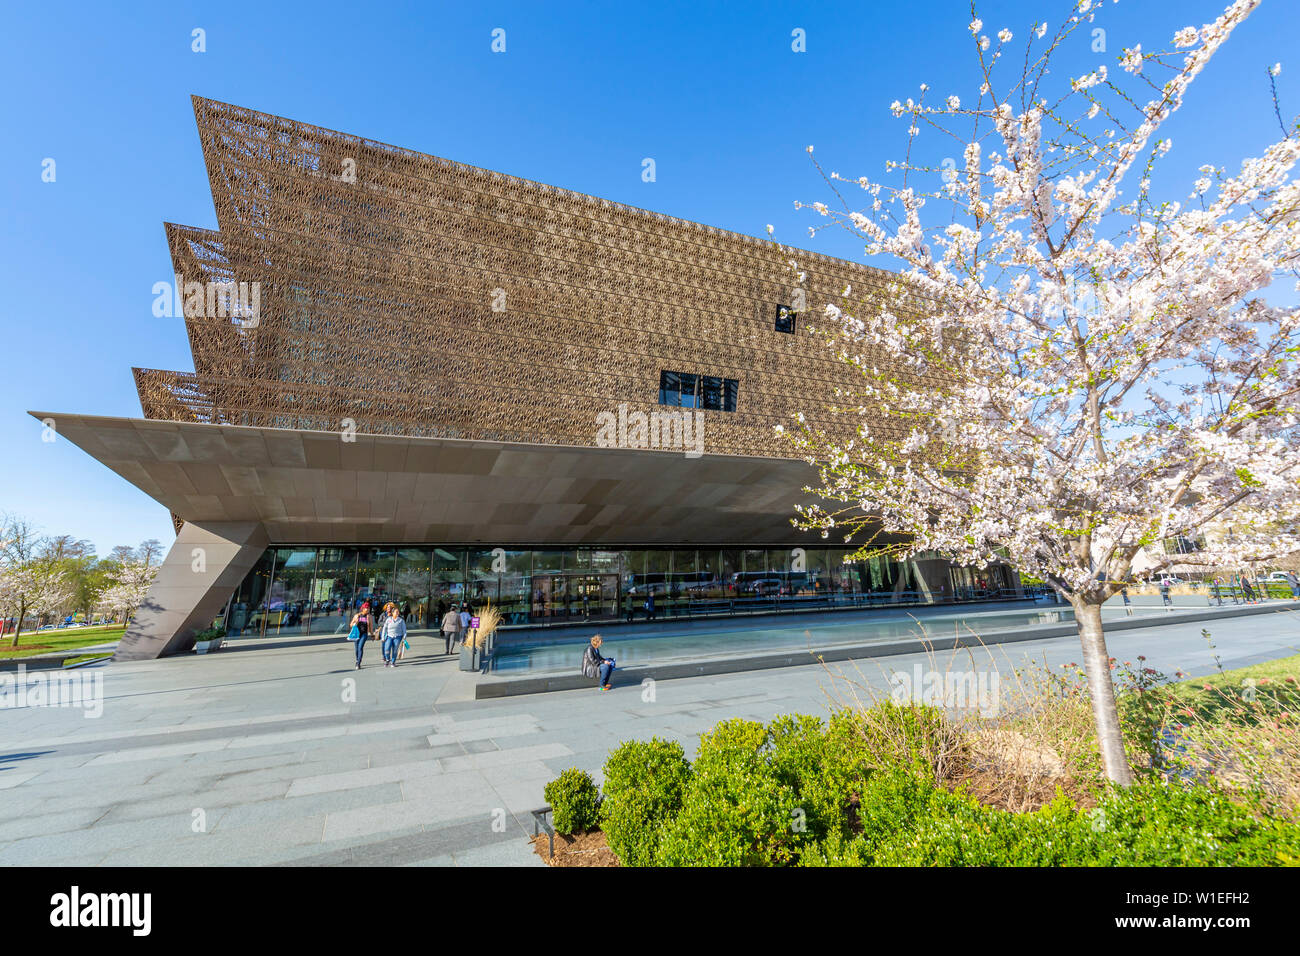 The National Museum of African American History and Culture in spring, Washington D.C., United States of America, North America Stock Photo